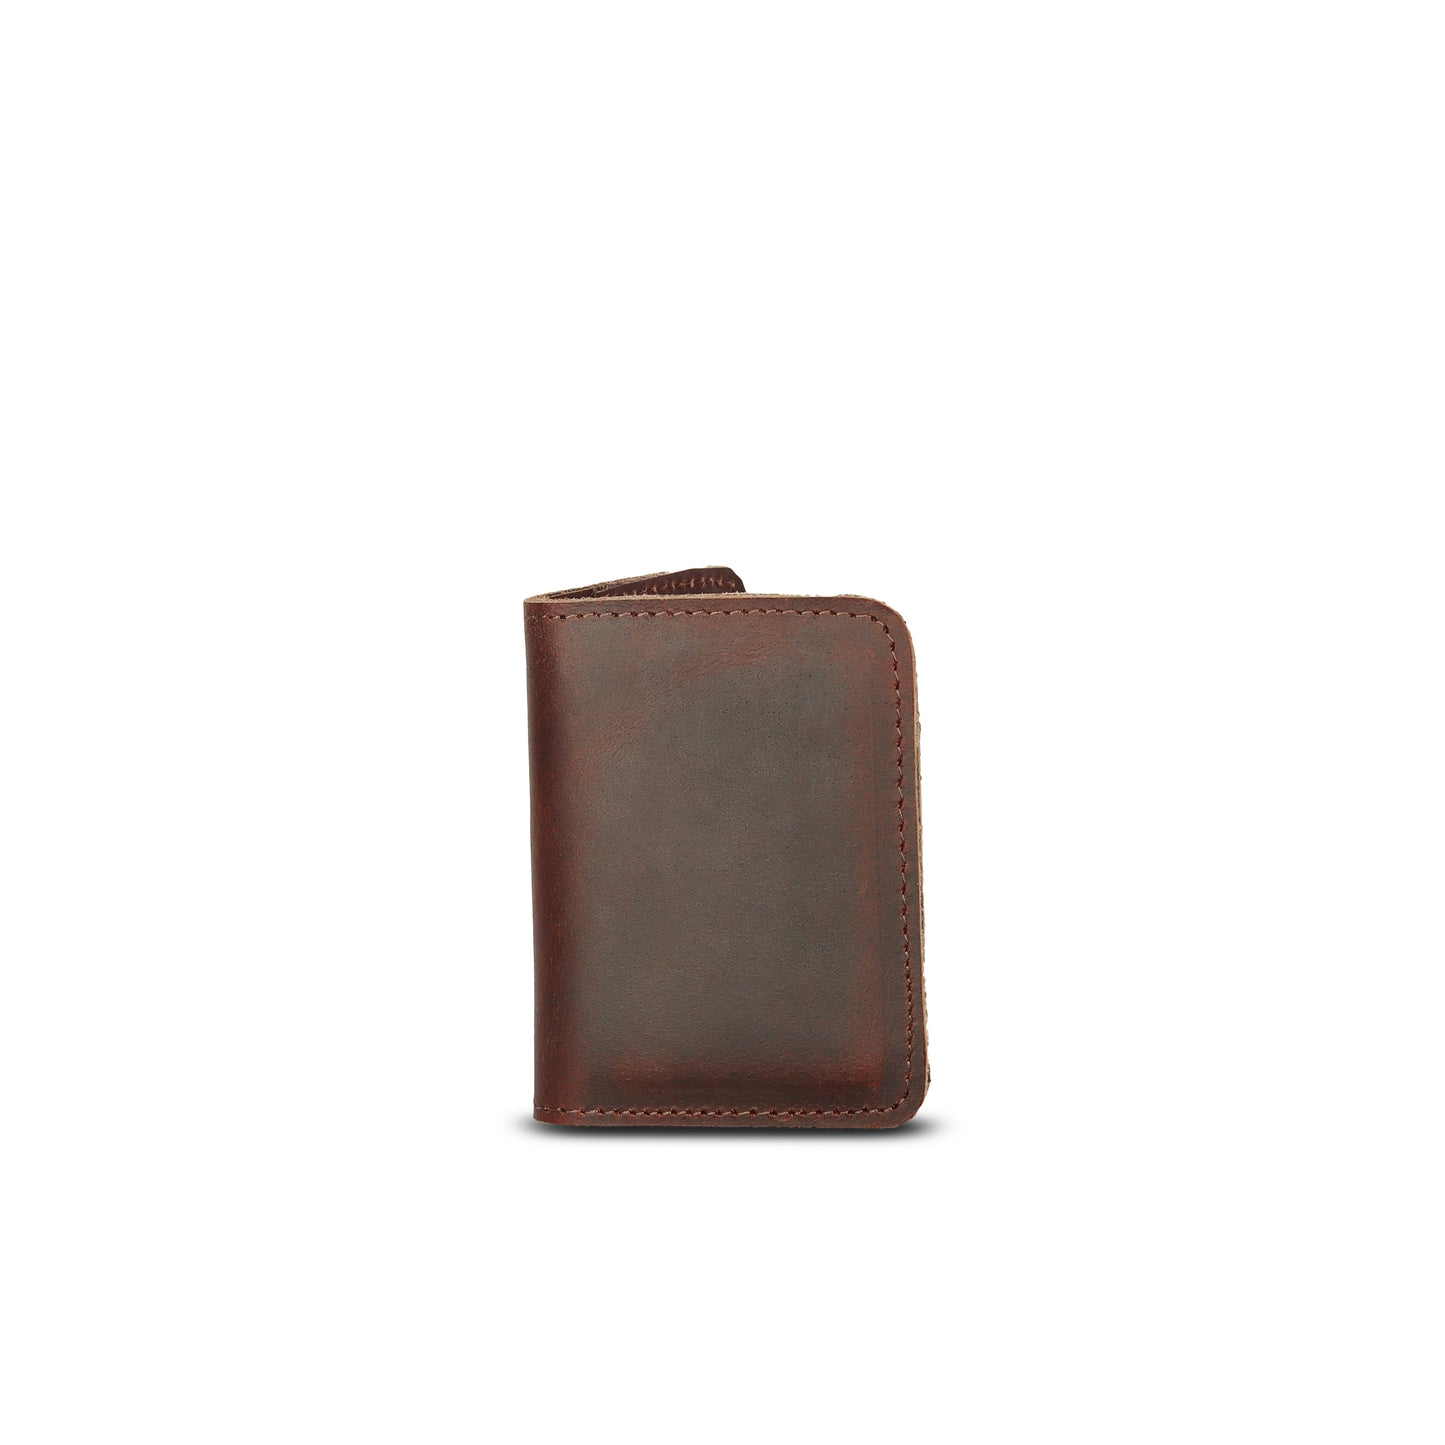 Cards Mate Card Holder Small Size Sepia Wine